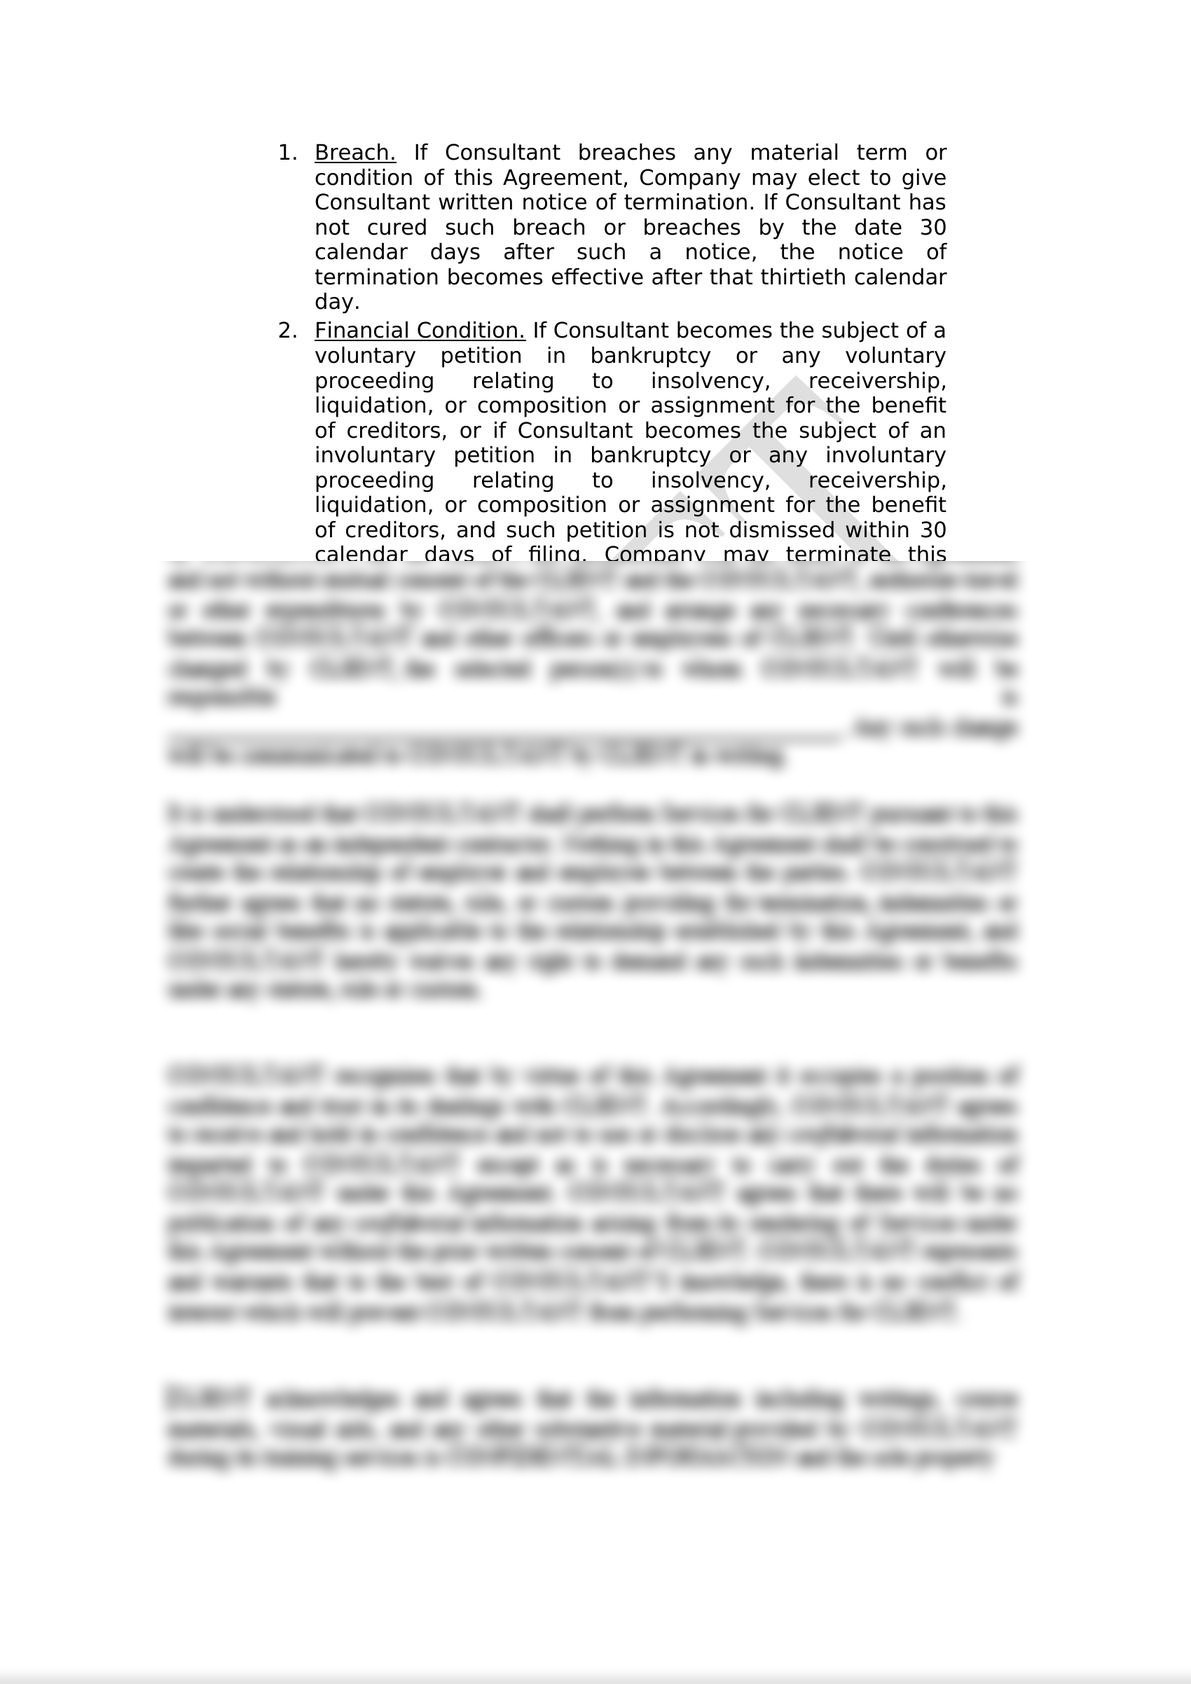 Consulting Agreement (IP Context)-6